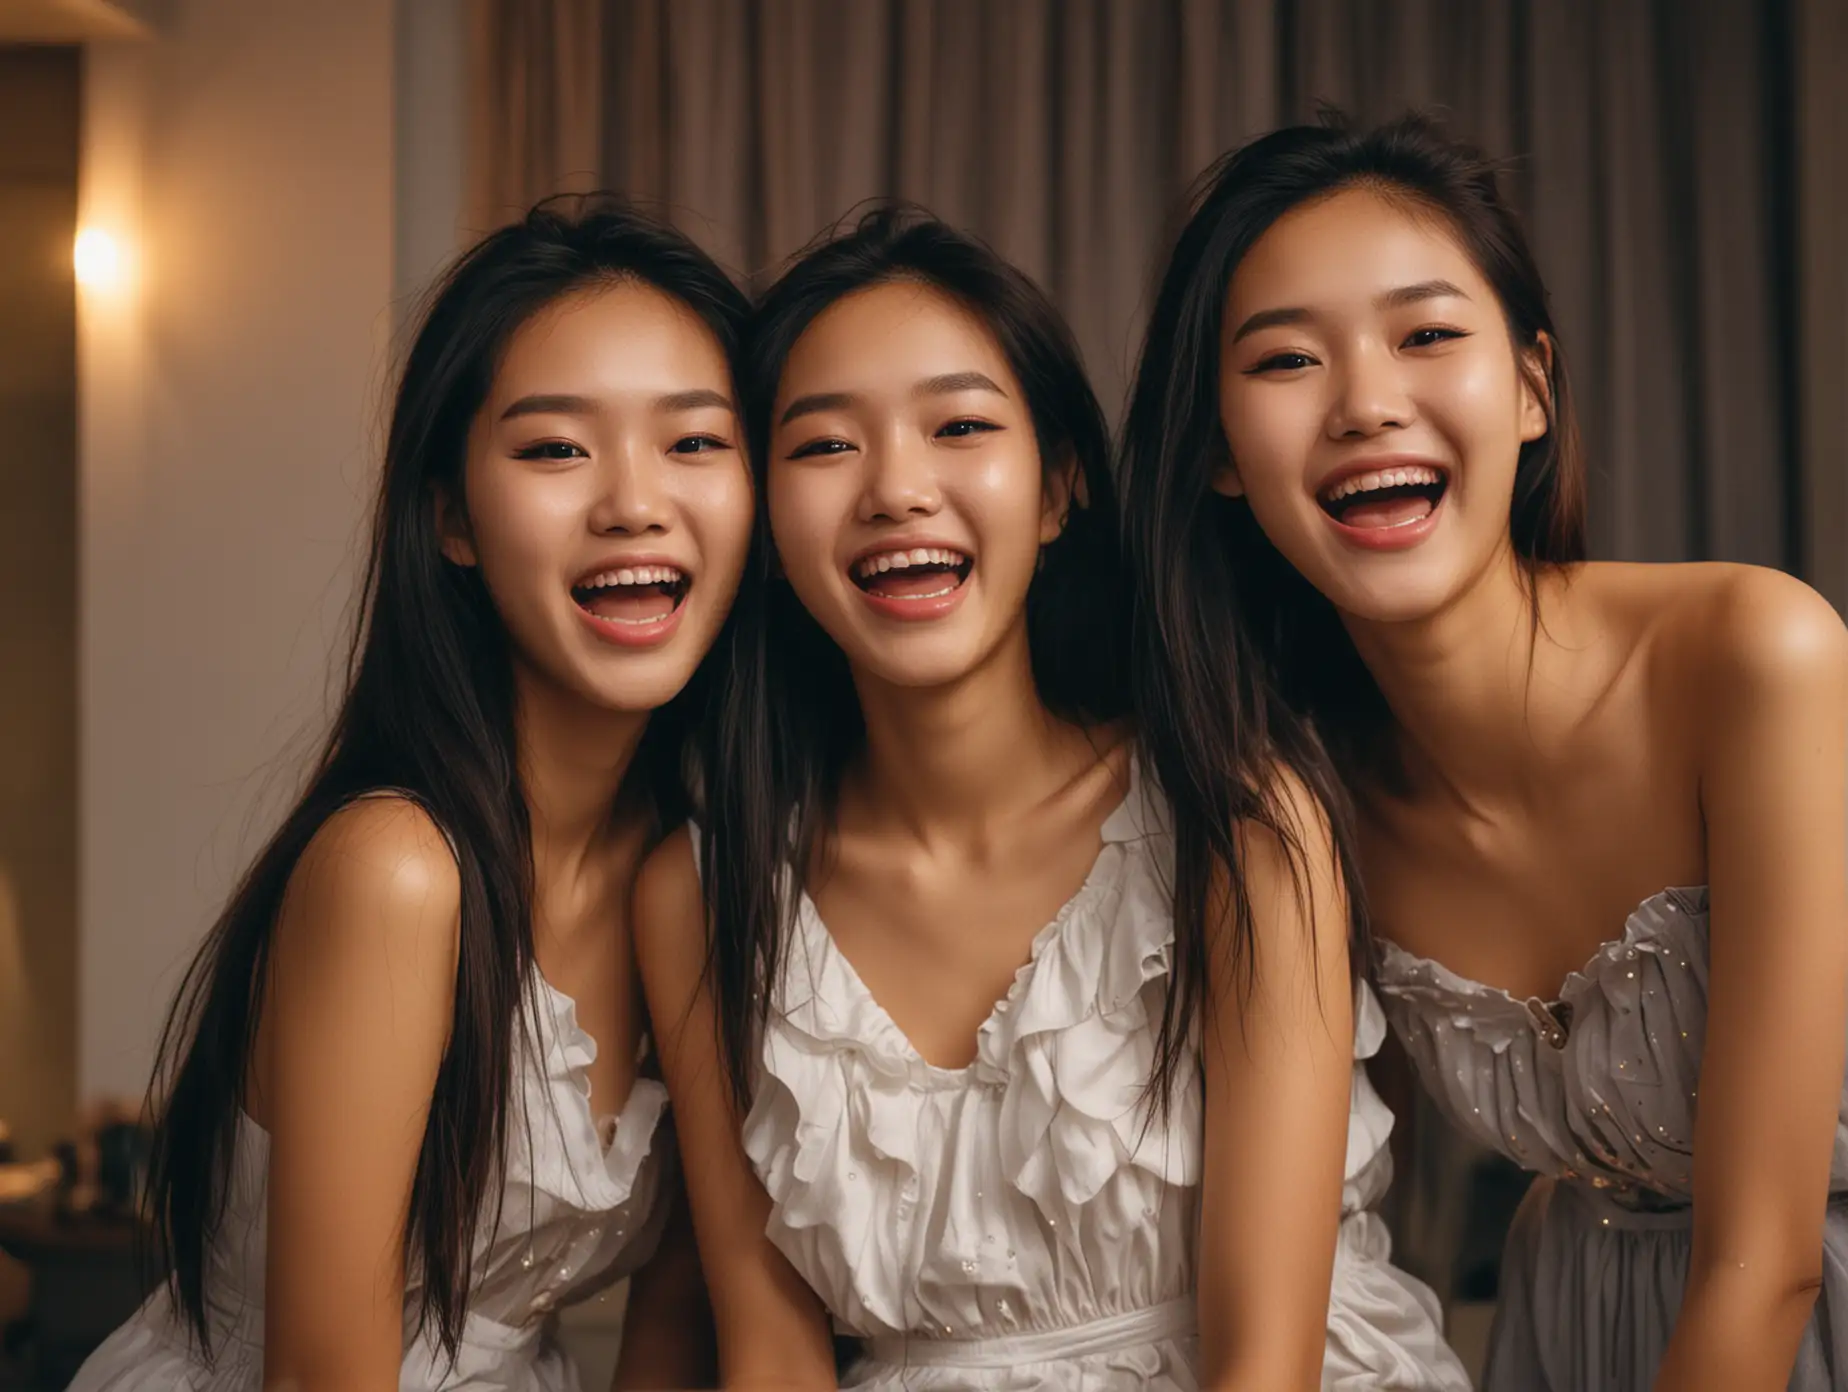 faces of three beautiful slender angelic 19-year old vietnamese models at a party in a penthouse at dusk laughing hysterically together and overflowing with joy